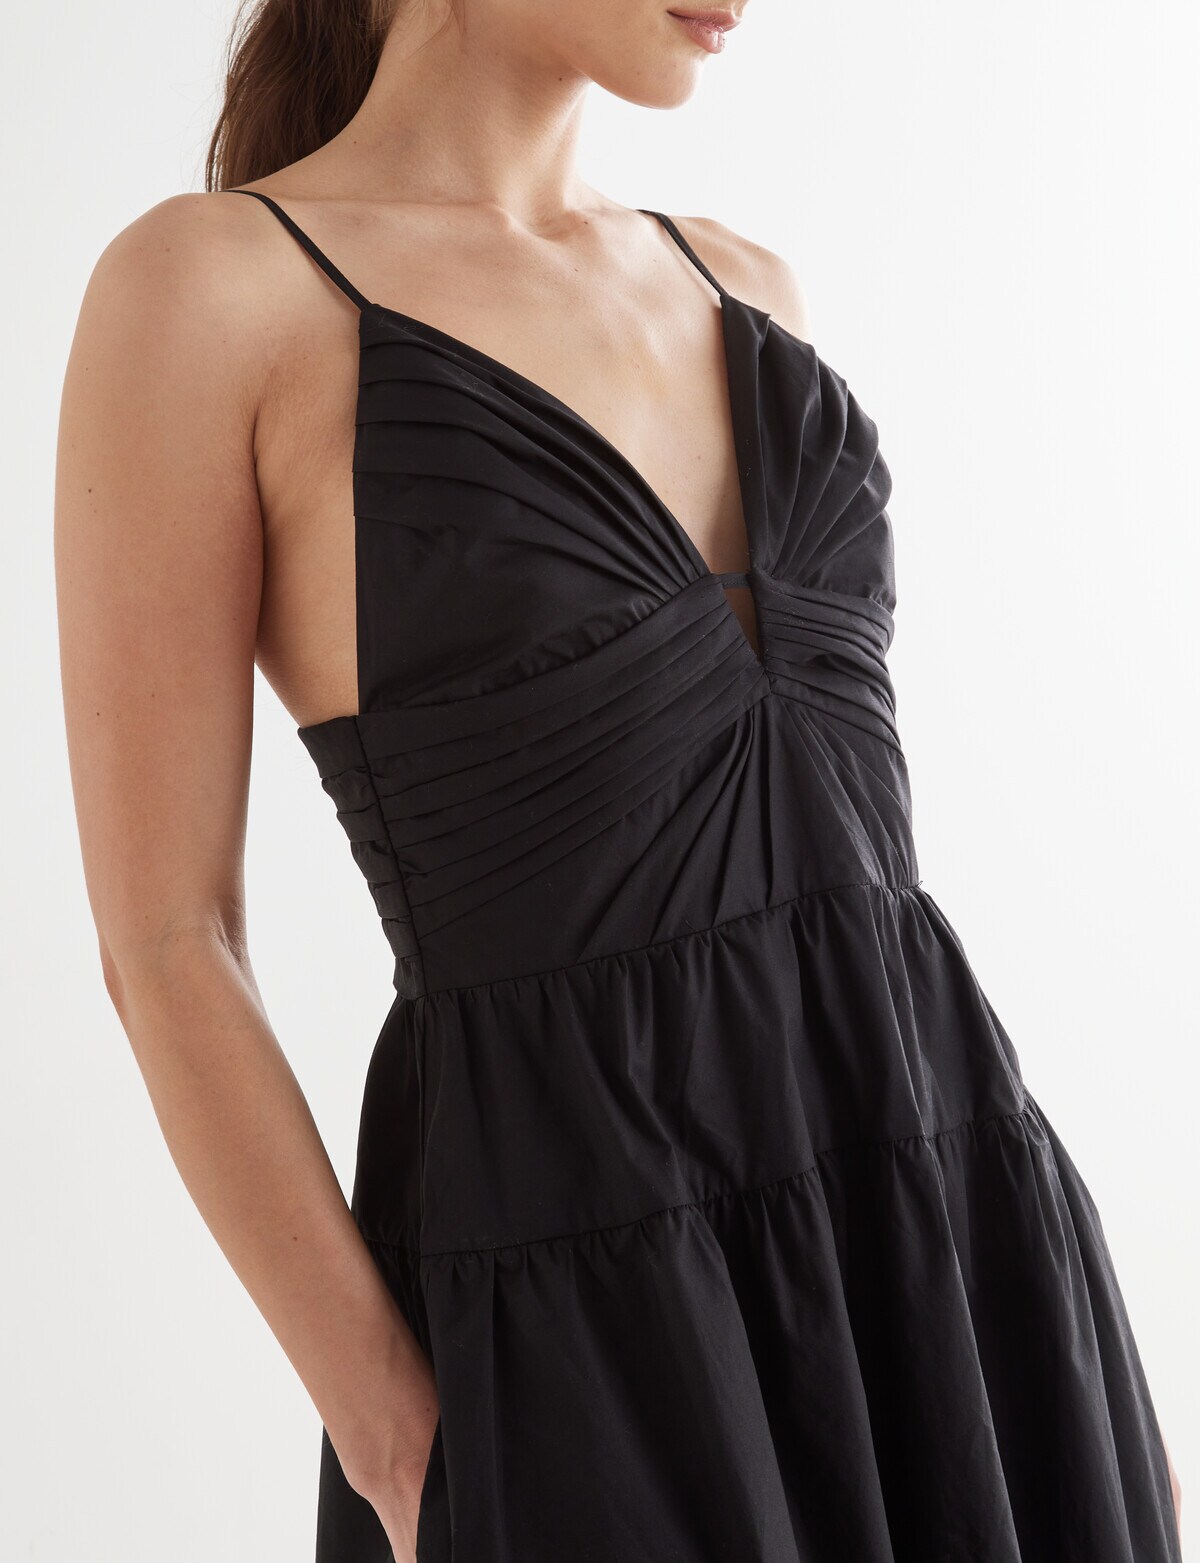 State of play Mazzy Dress, Black - Dresses